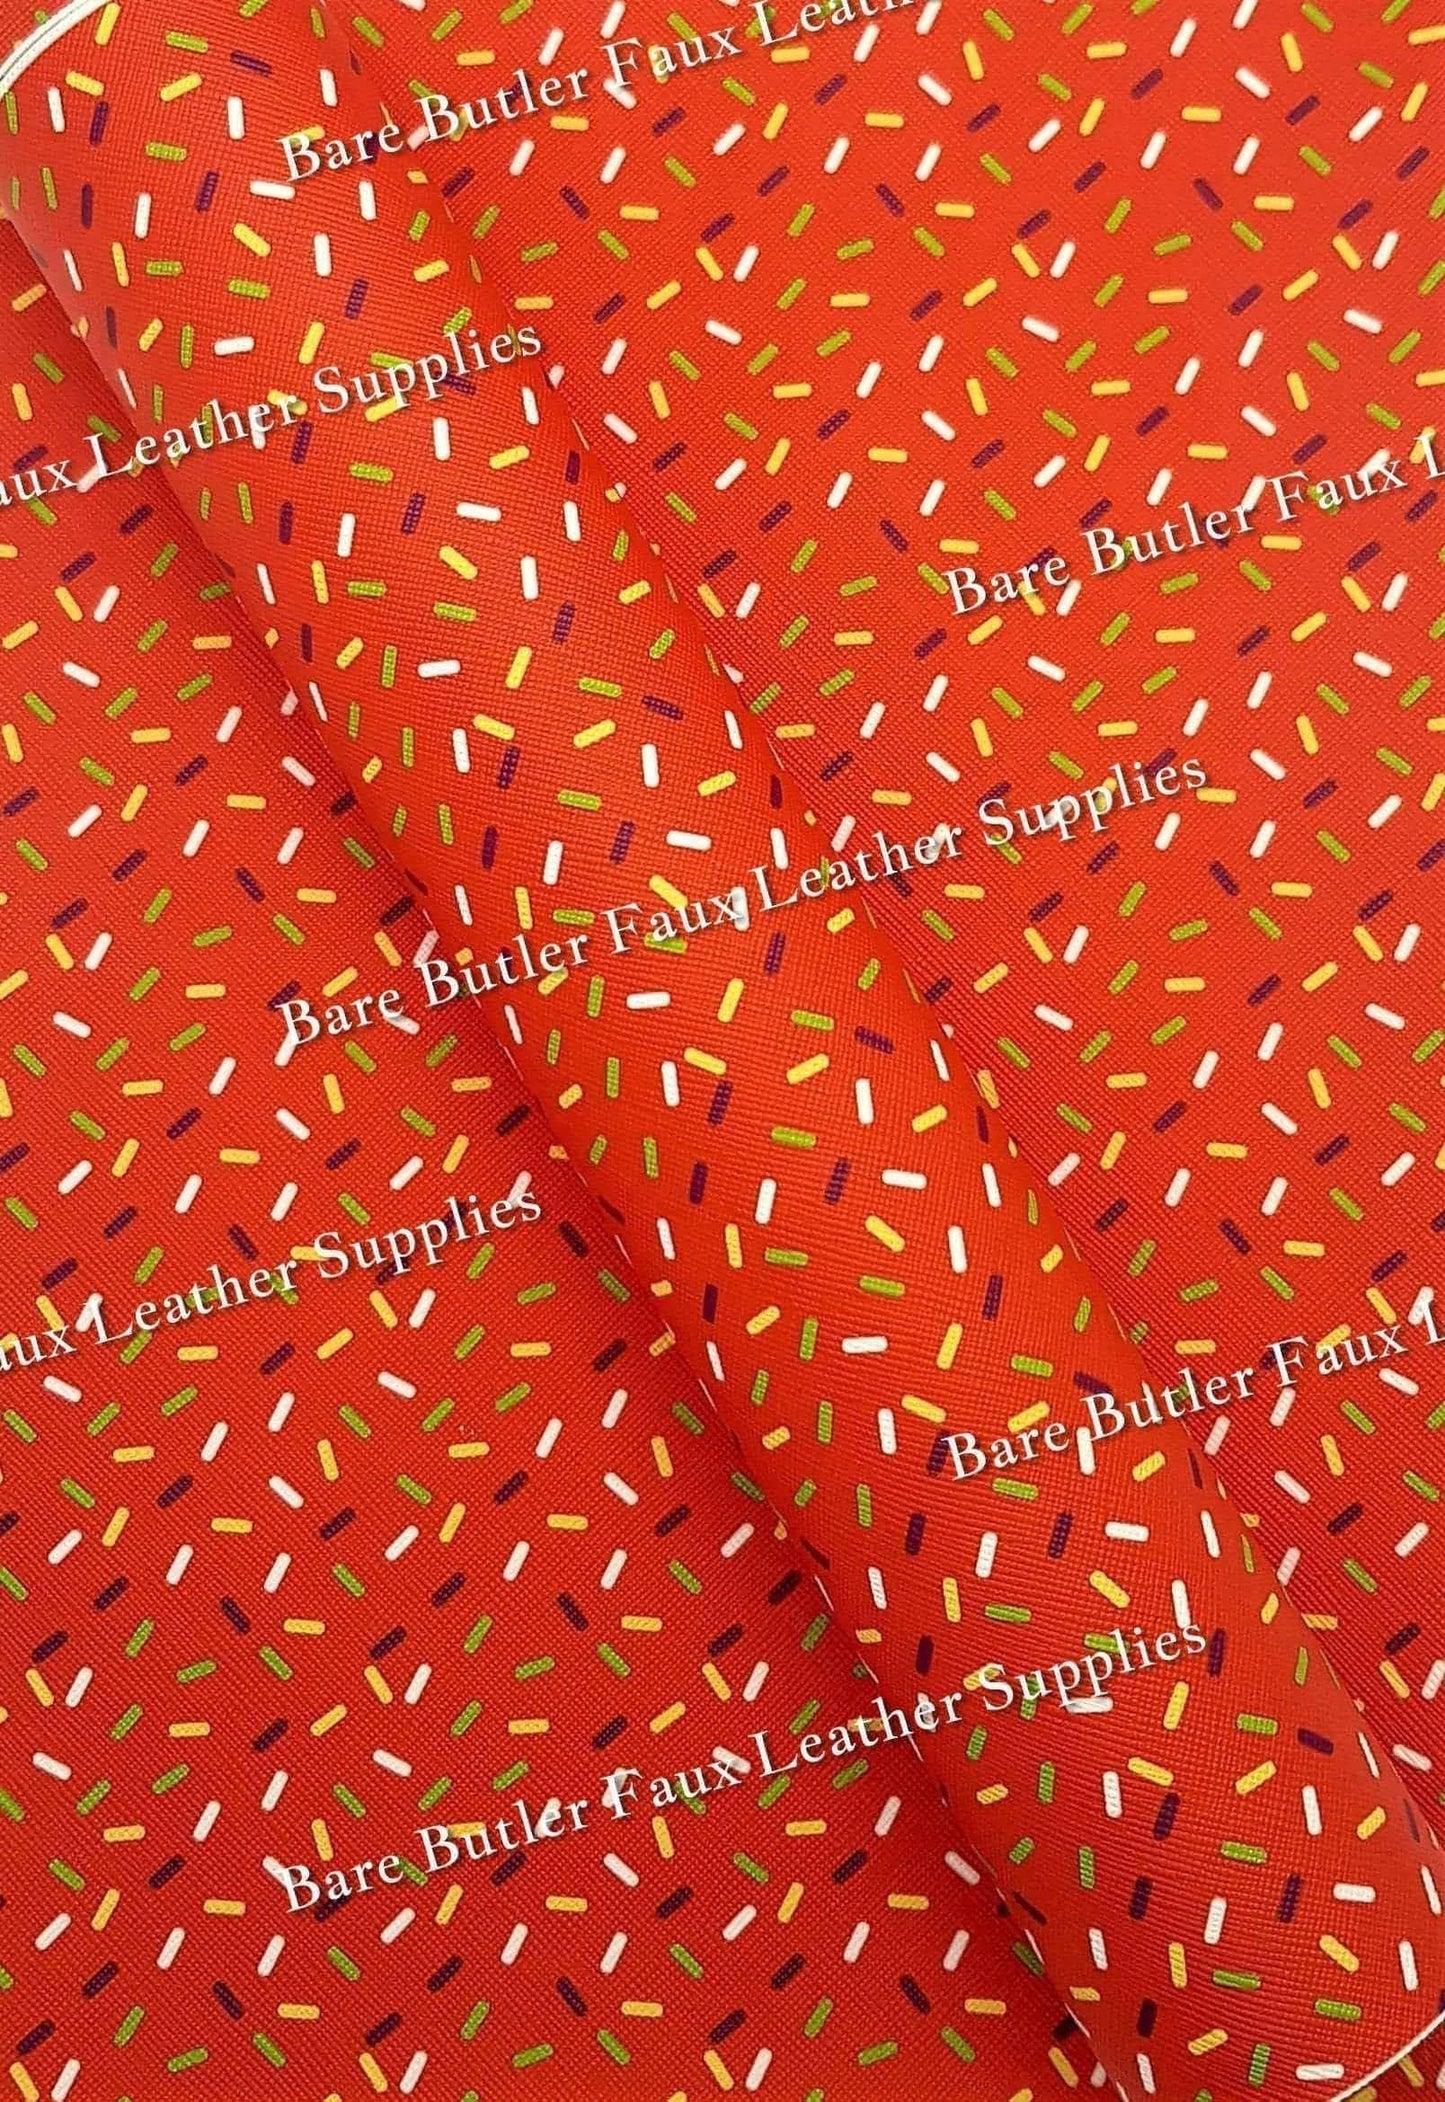 Sprinkles Orange Faux Leather - Faux, Faux Leather, Ice cream, leatherette, orange, Sprinkles, Sweets - Bare Butler Faux Leather Supplies 